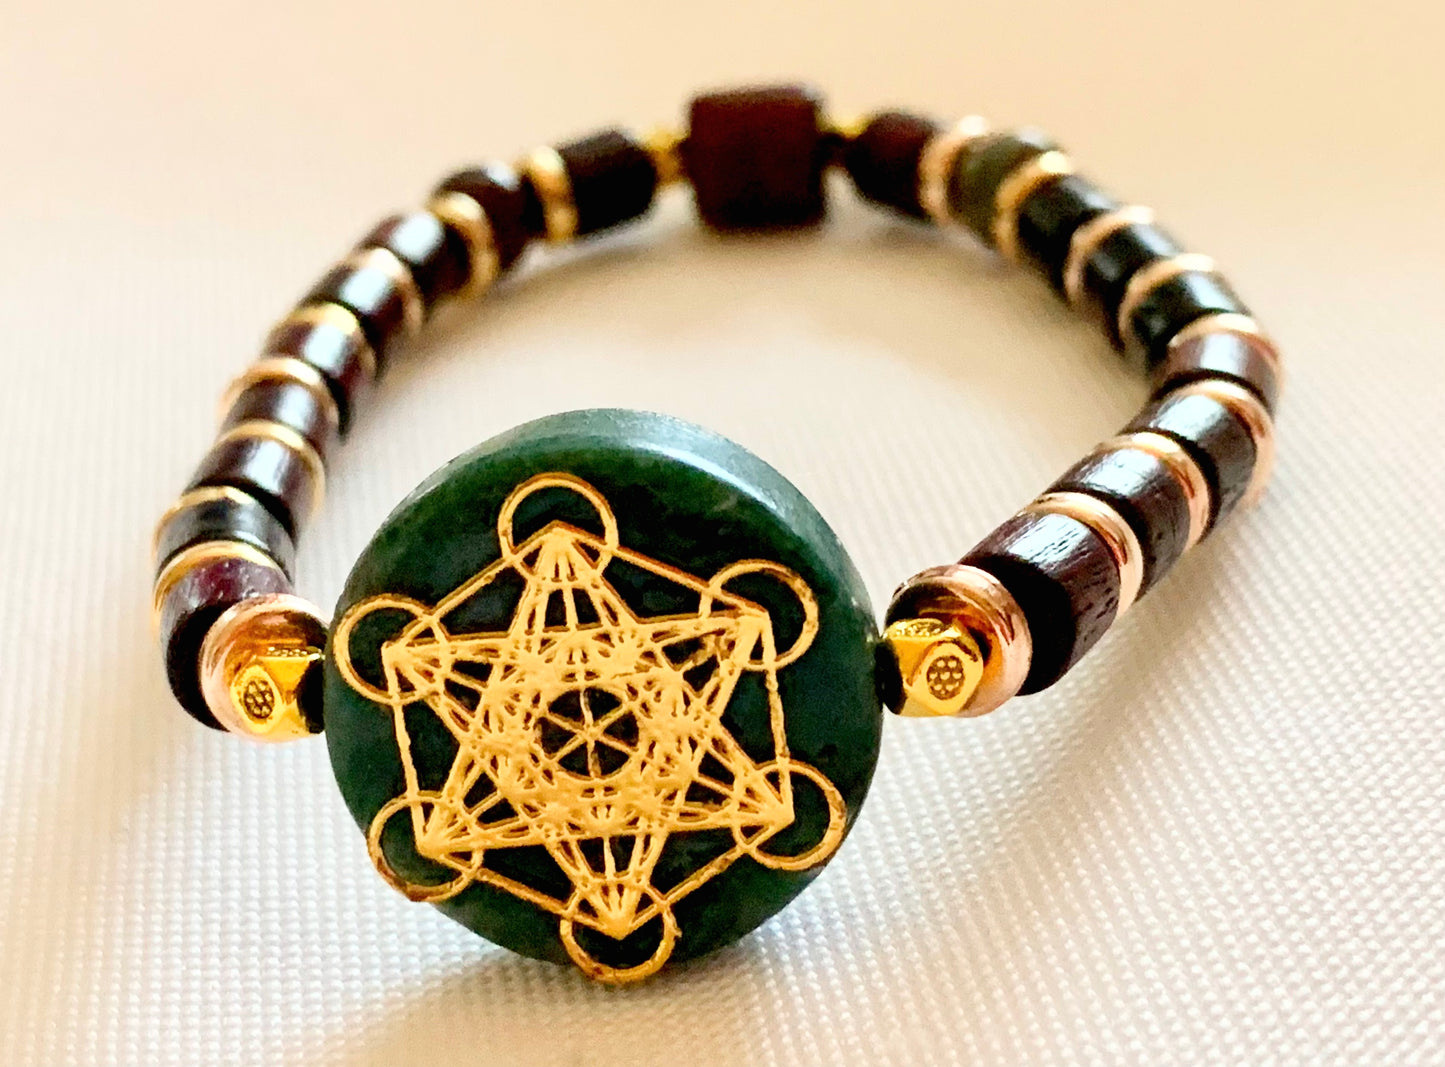 🔴SOLD🔴 Michael Handmade Italian Green Marble, Bloodstone, and Wood Expandable Bracelet